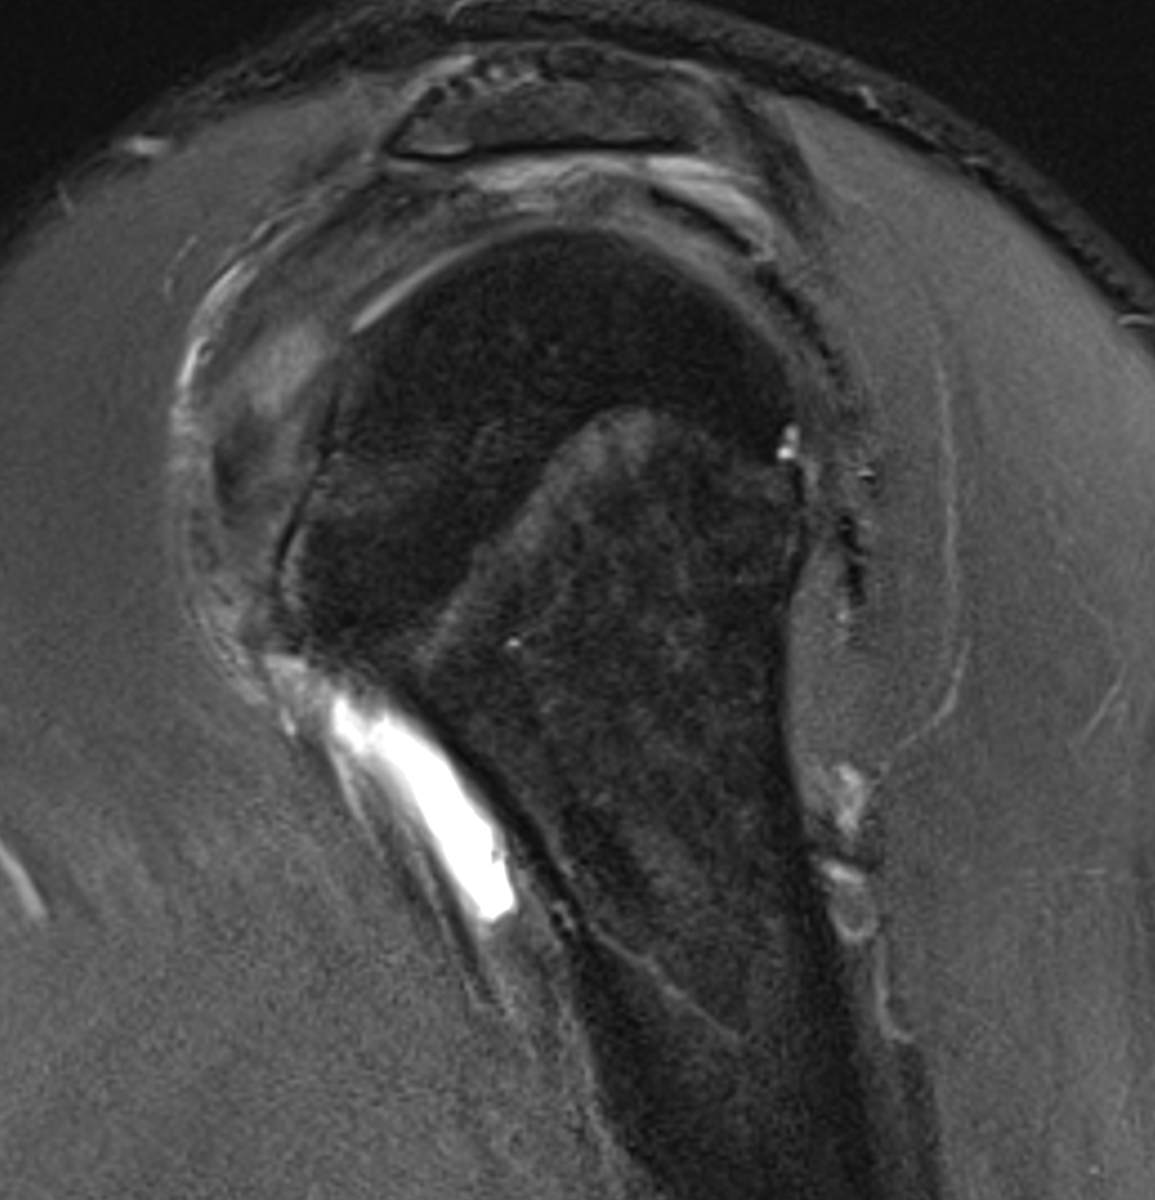 🎯What are the main findings here? 
🎯What has subluxed?
🎯Which pulley has been injured?

#mskrad #radres #radfellow